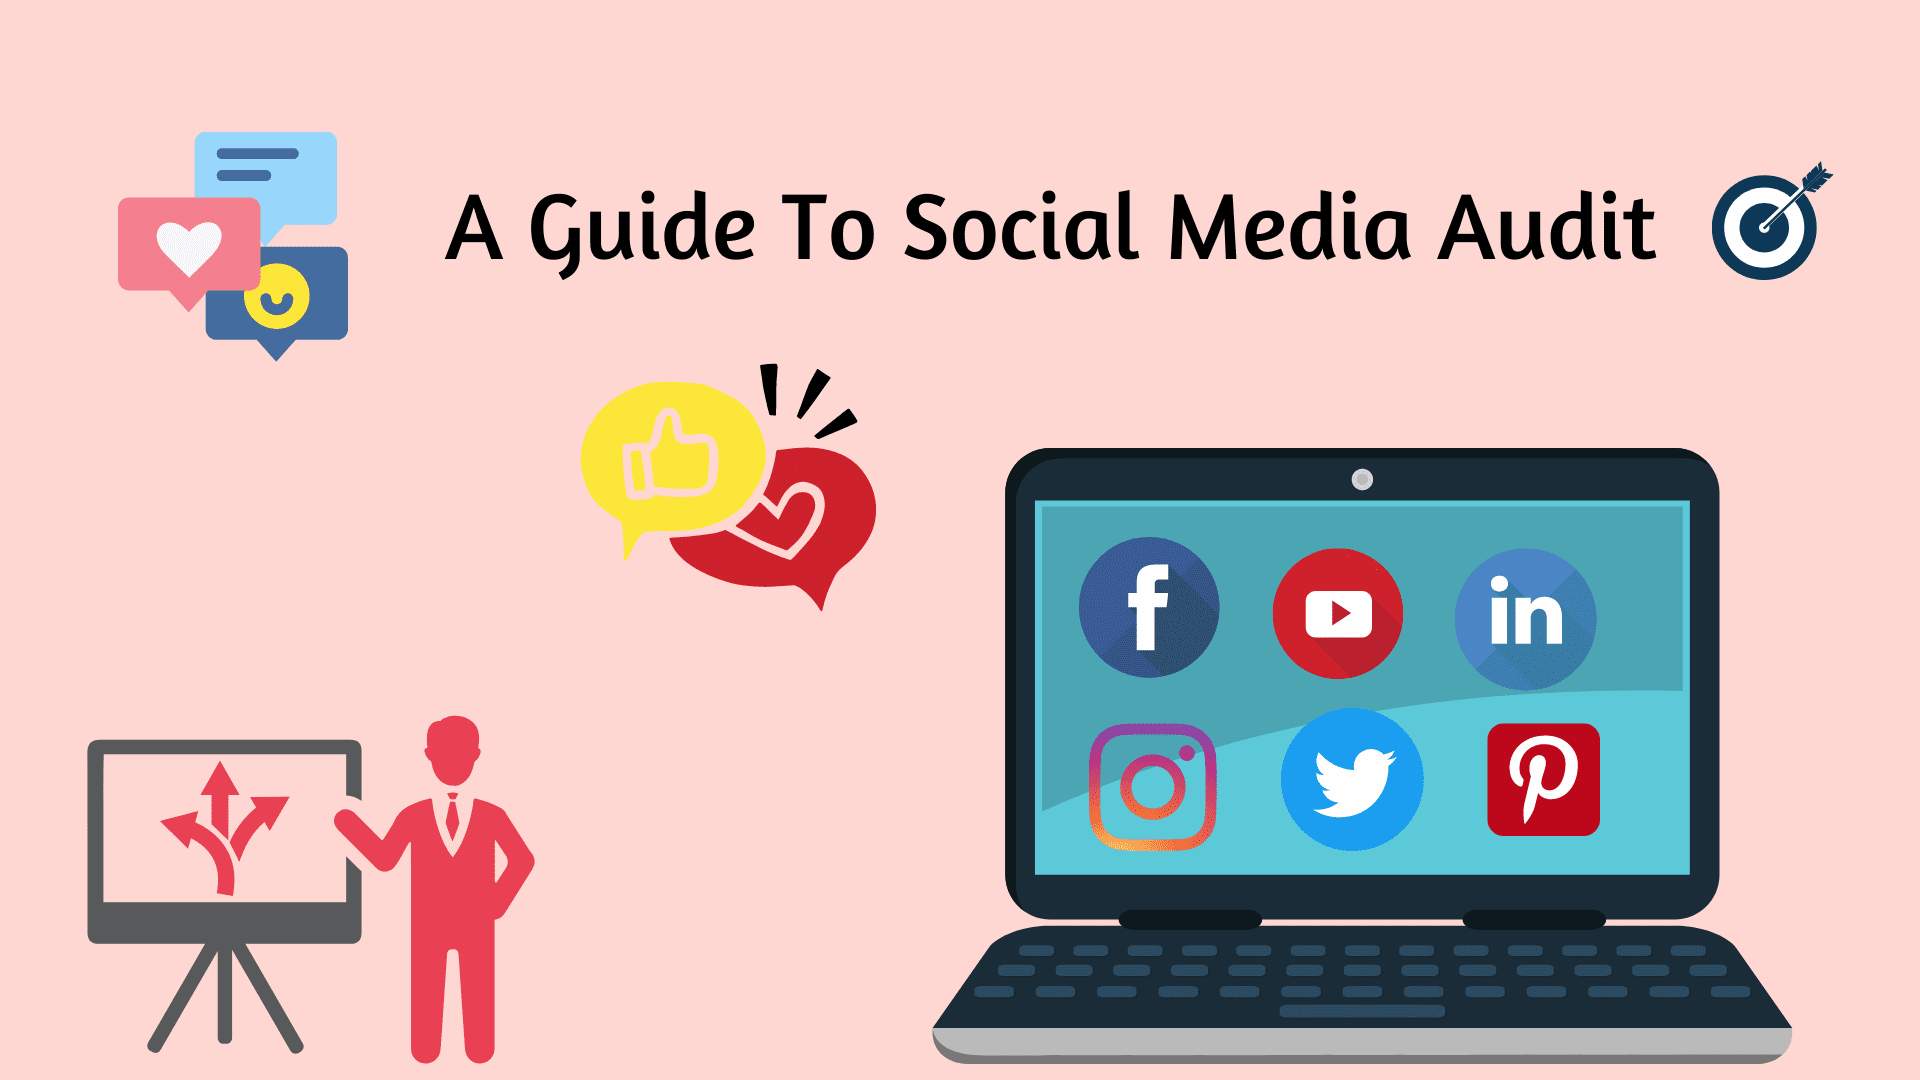 A guide to social media audit